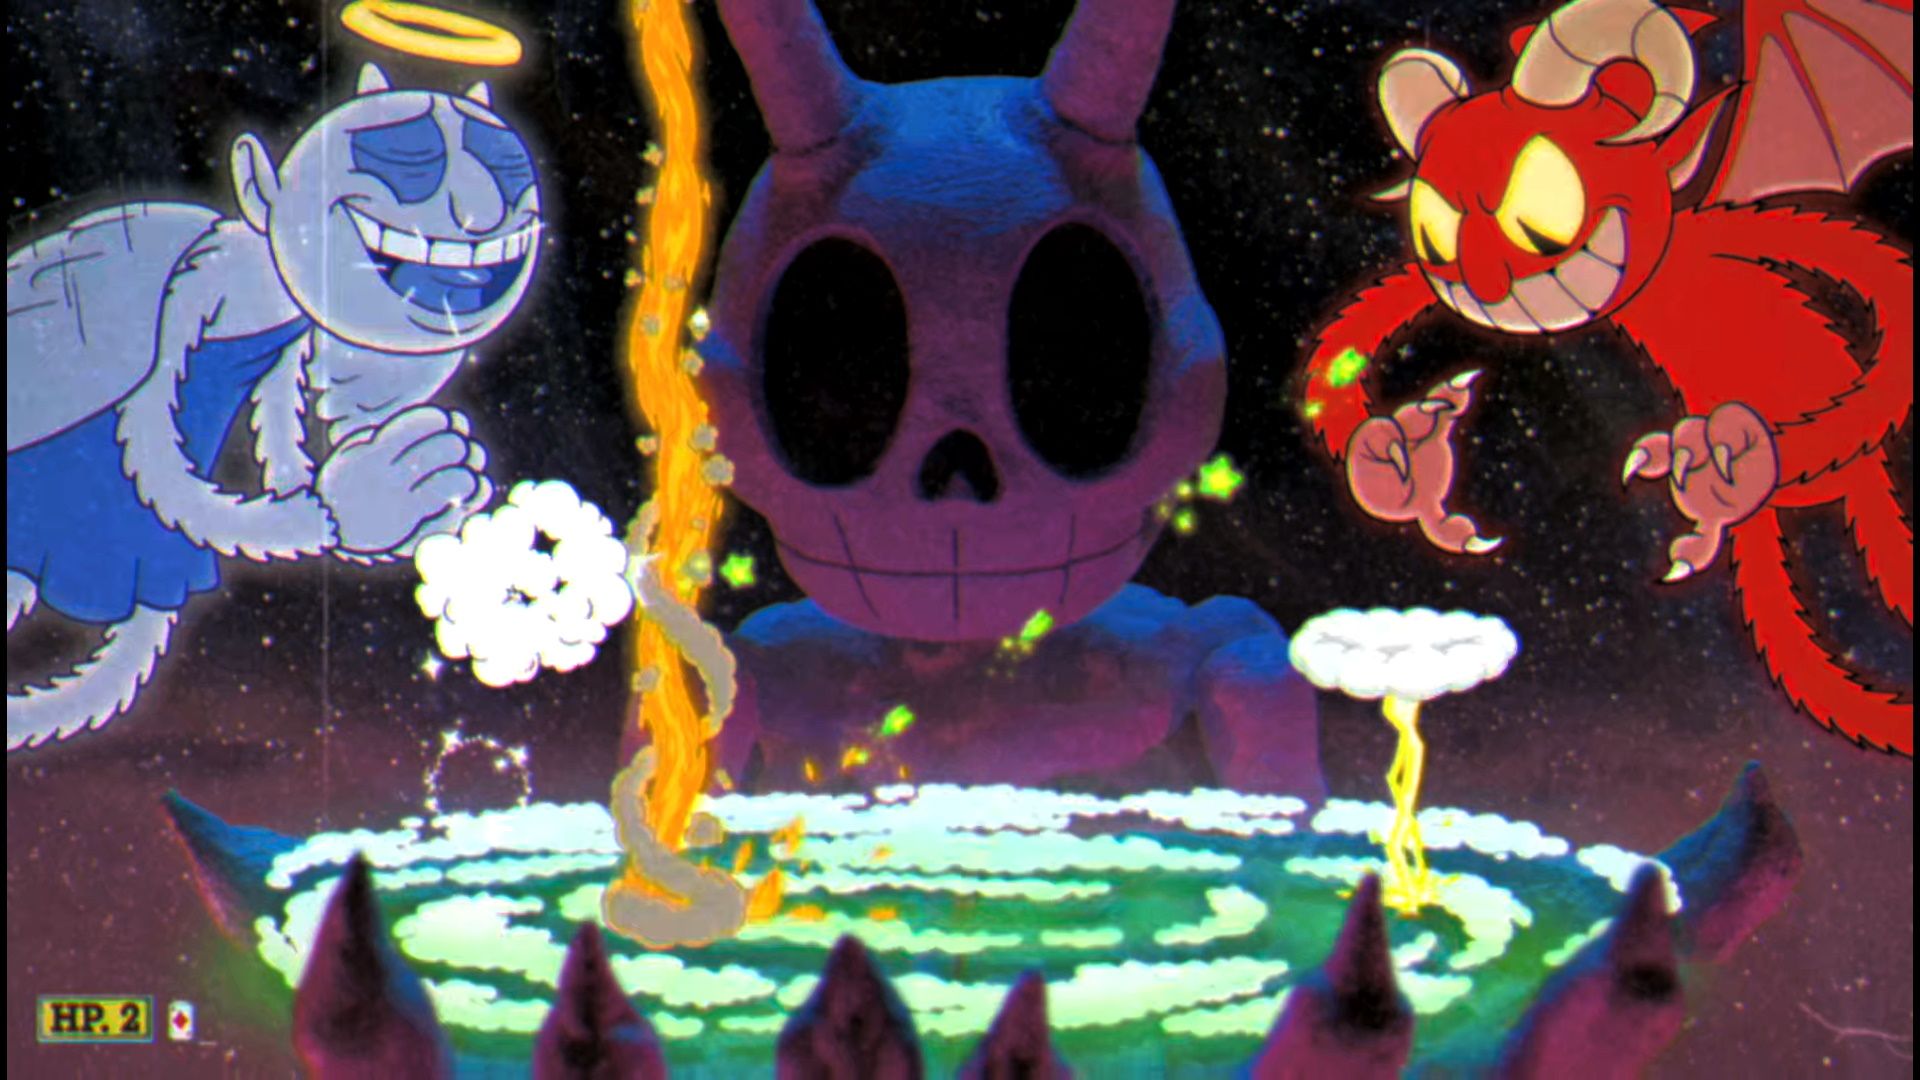 Cuphead The Delicious Course, The Angel And Devil, Dashing Through Pillar Of Flame